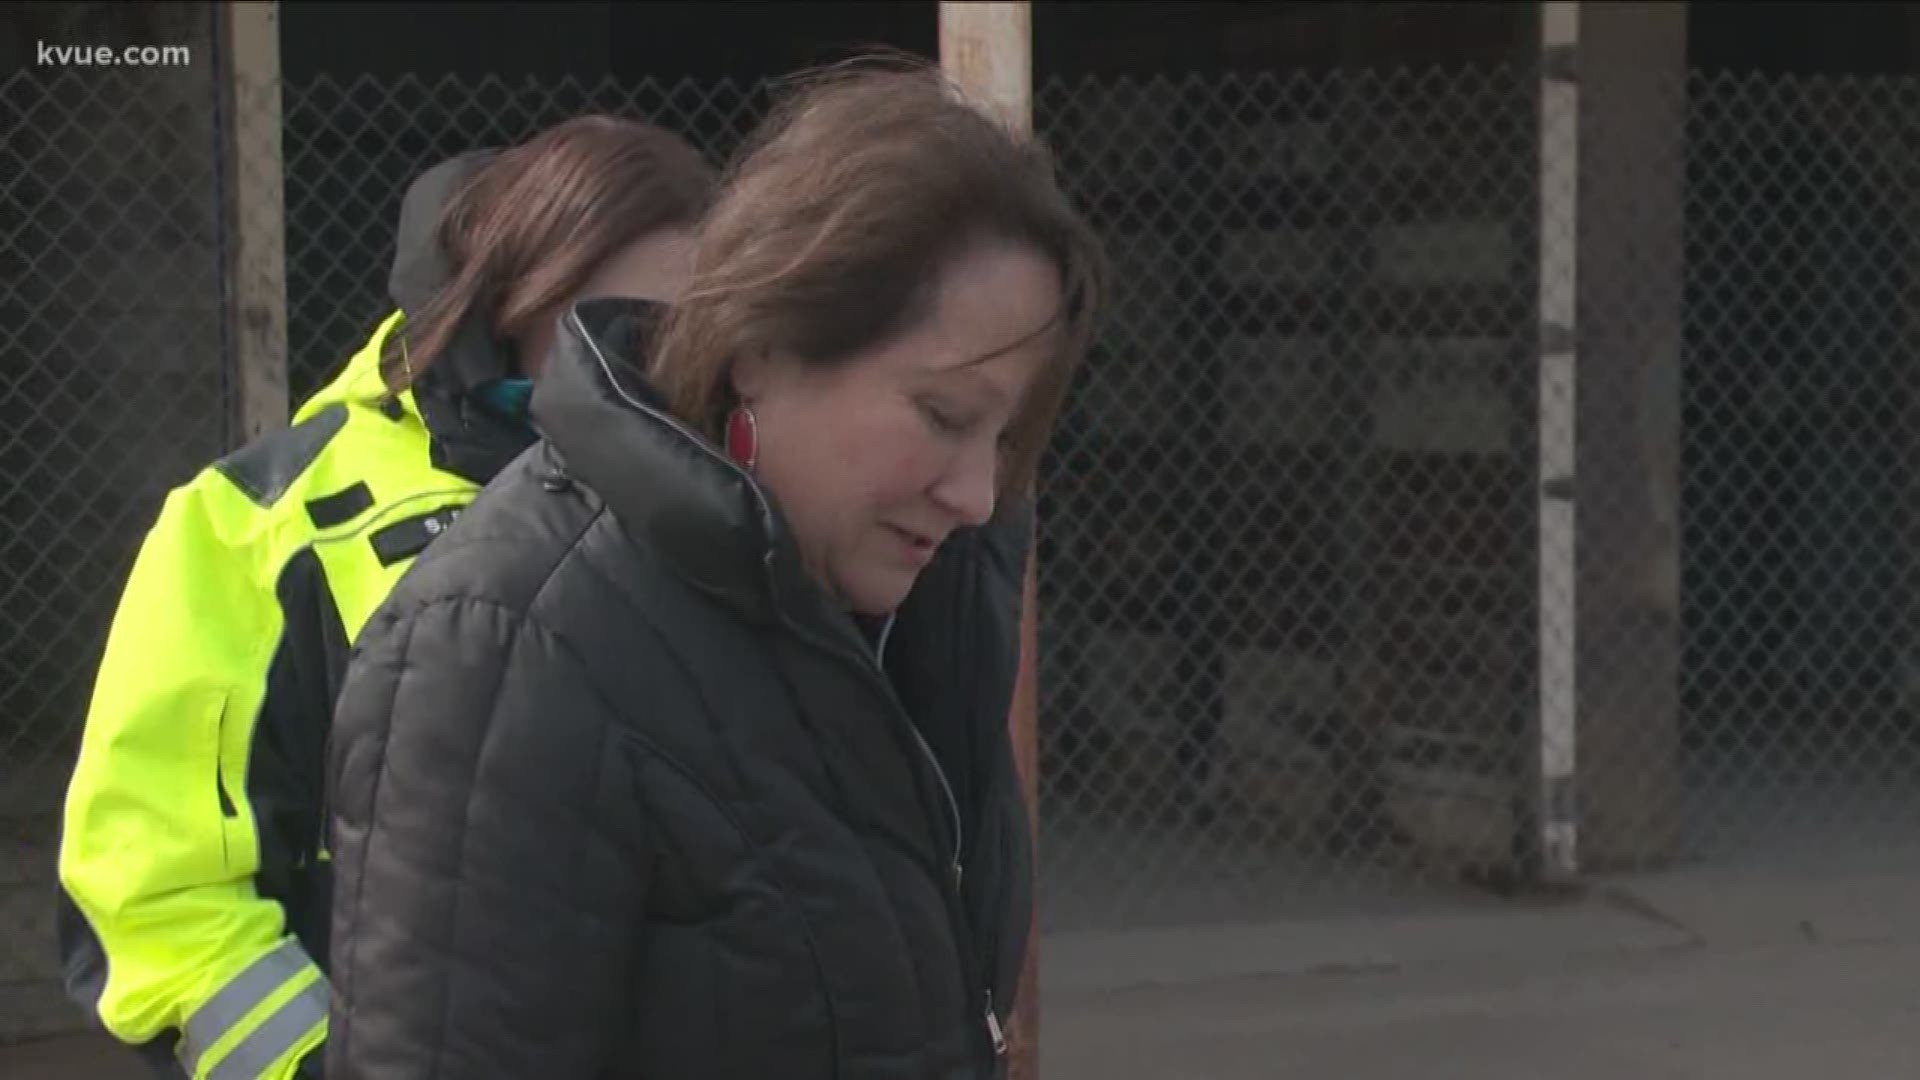 Cecilia Abbott was spotted at the State's homeless camp, handing out blankets and other supplies.